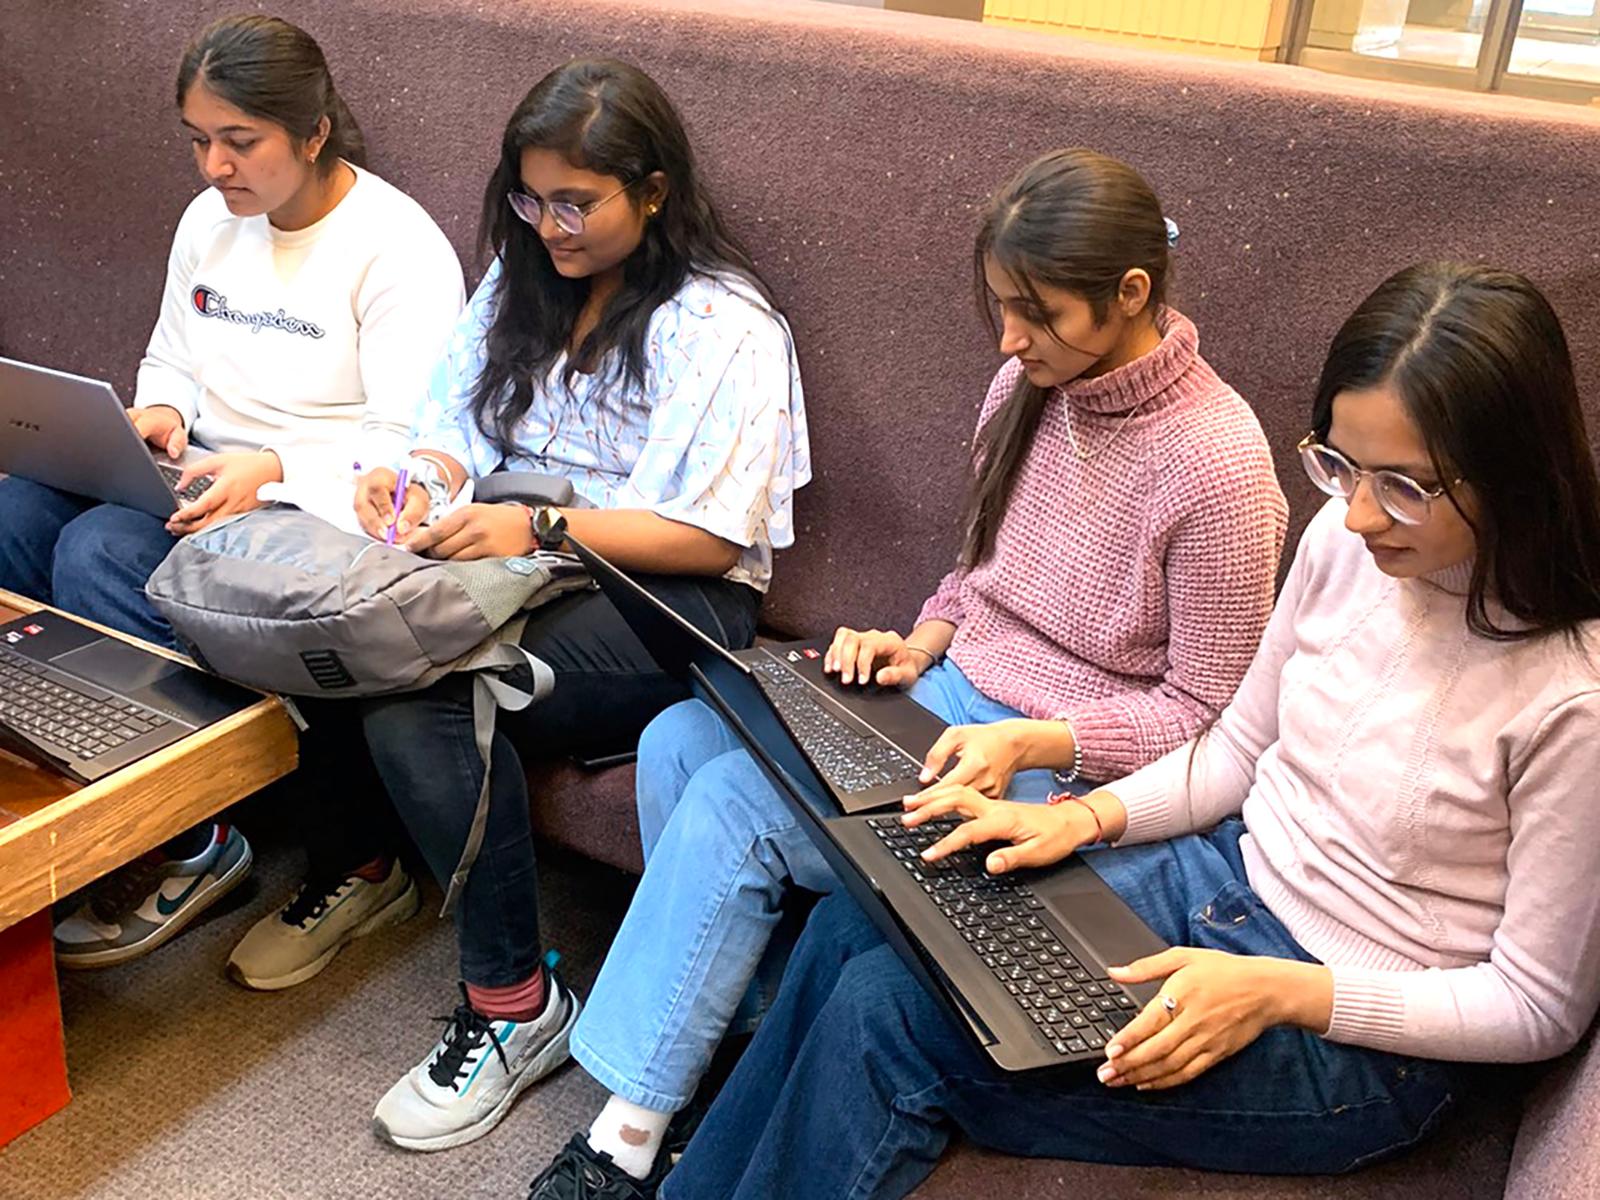 four female students sitting in a corner of a large brown bench, three are looking at open laptops, the fourth is writing on a piece of paper